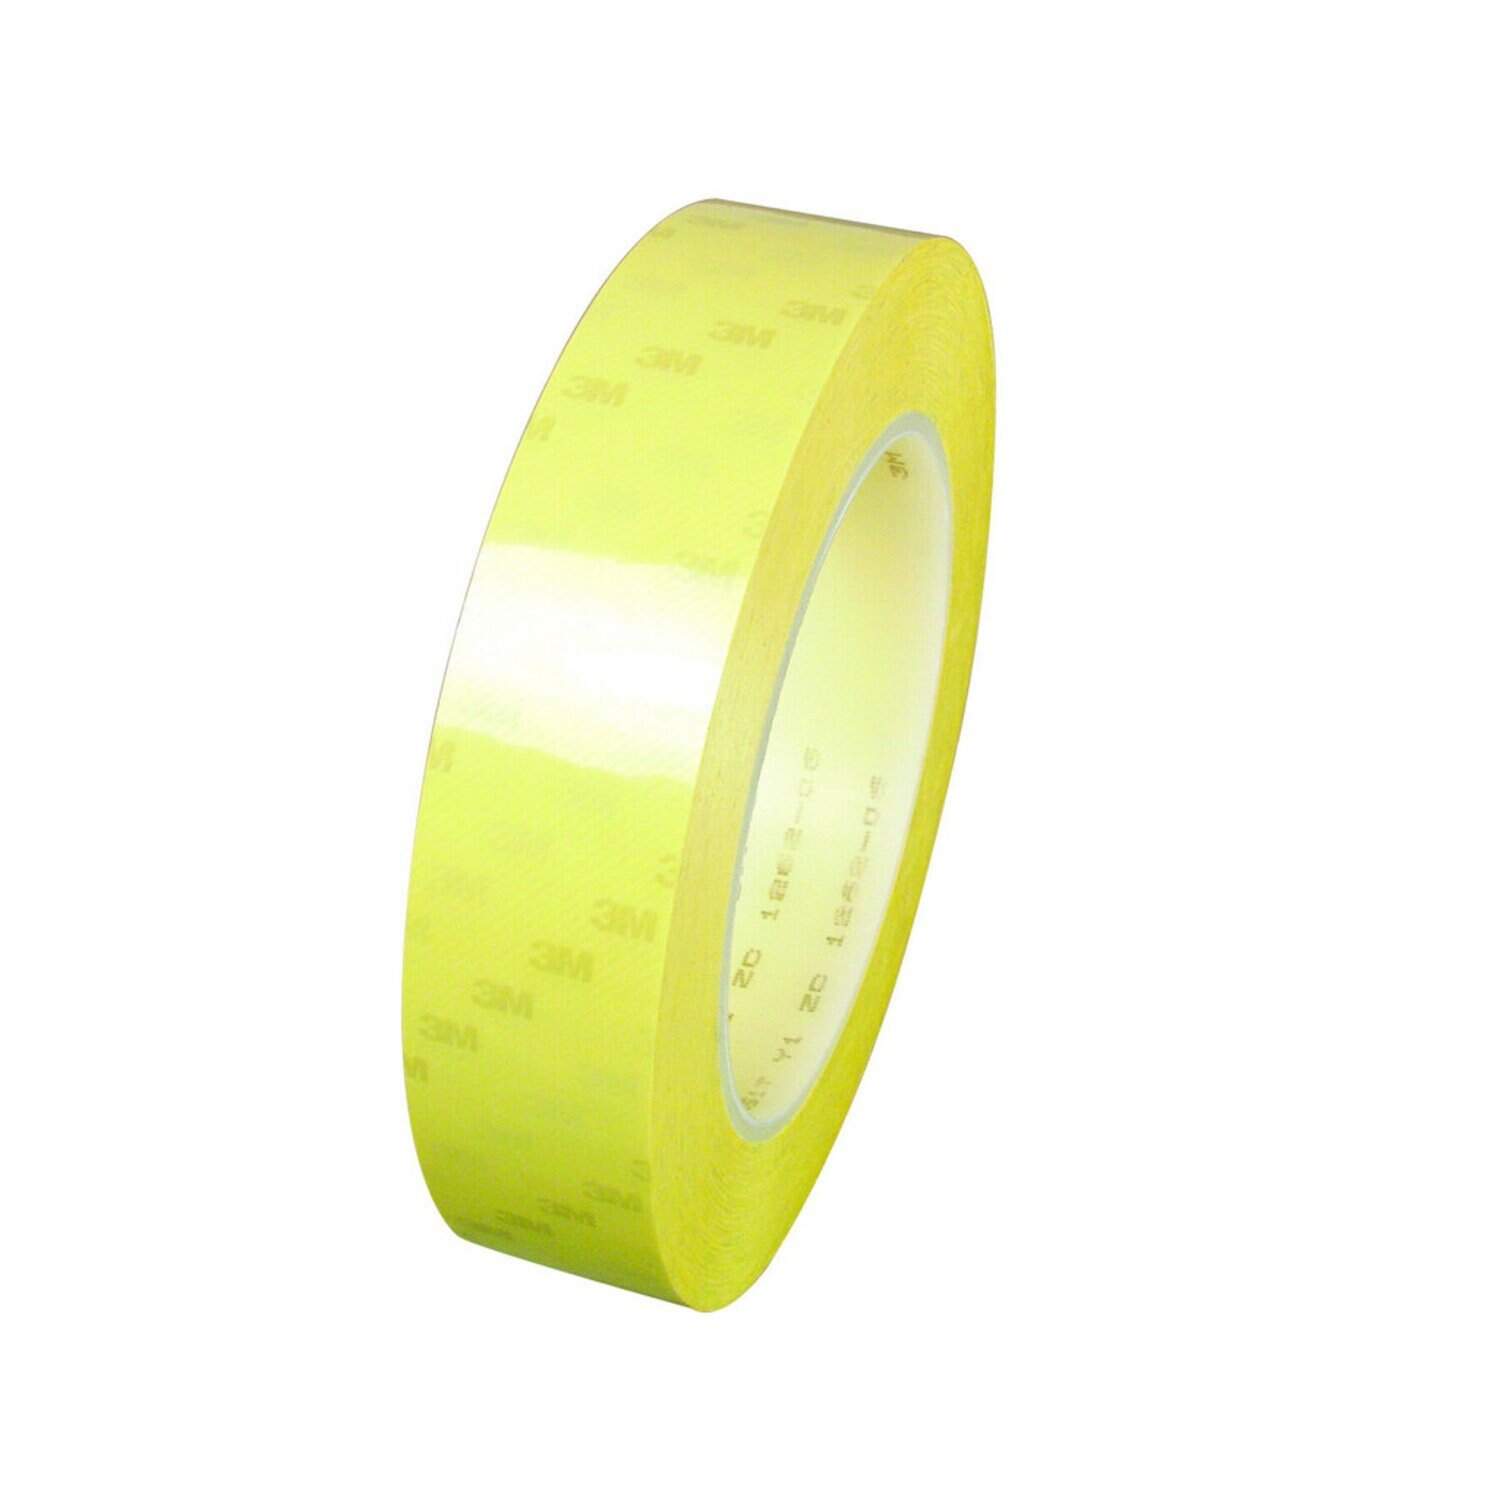 7000133150 - 3M Polyester Film Electrical Tape 56, 1 in x 72 yd, Yellow, 36
Rolls/Case